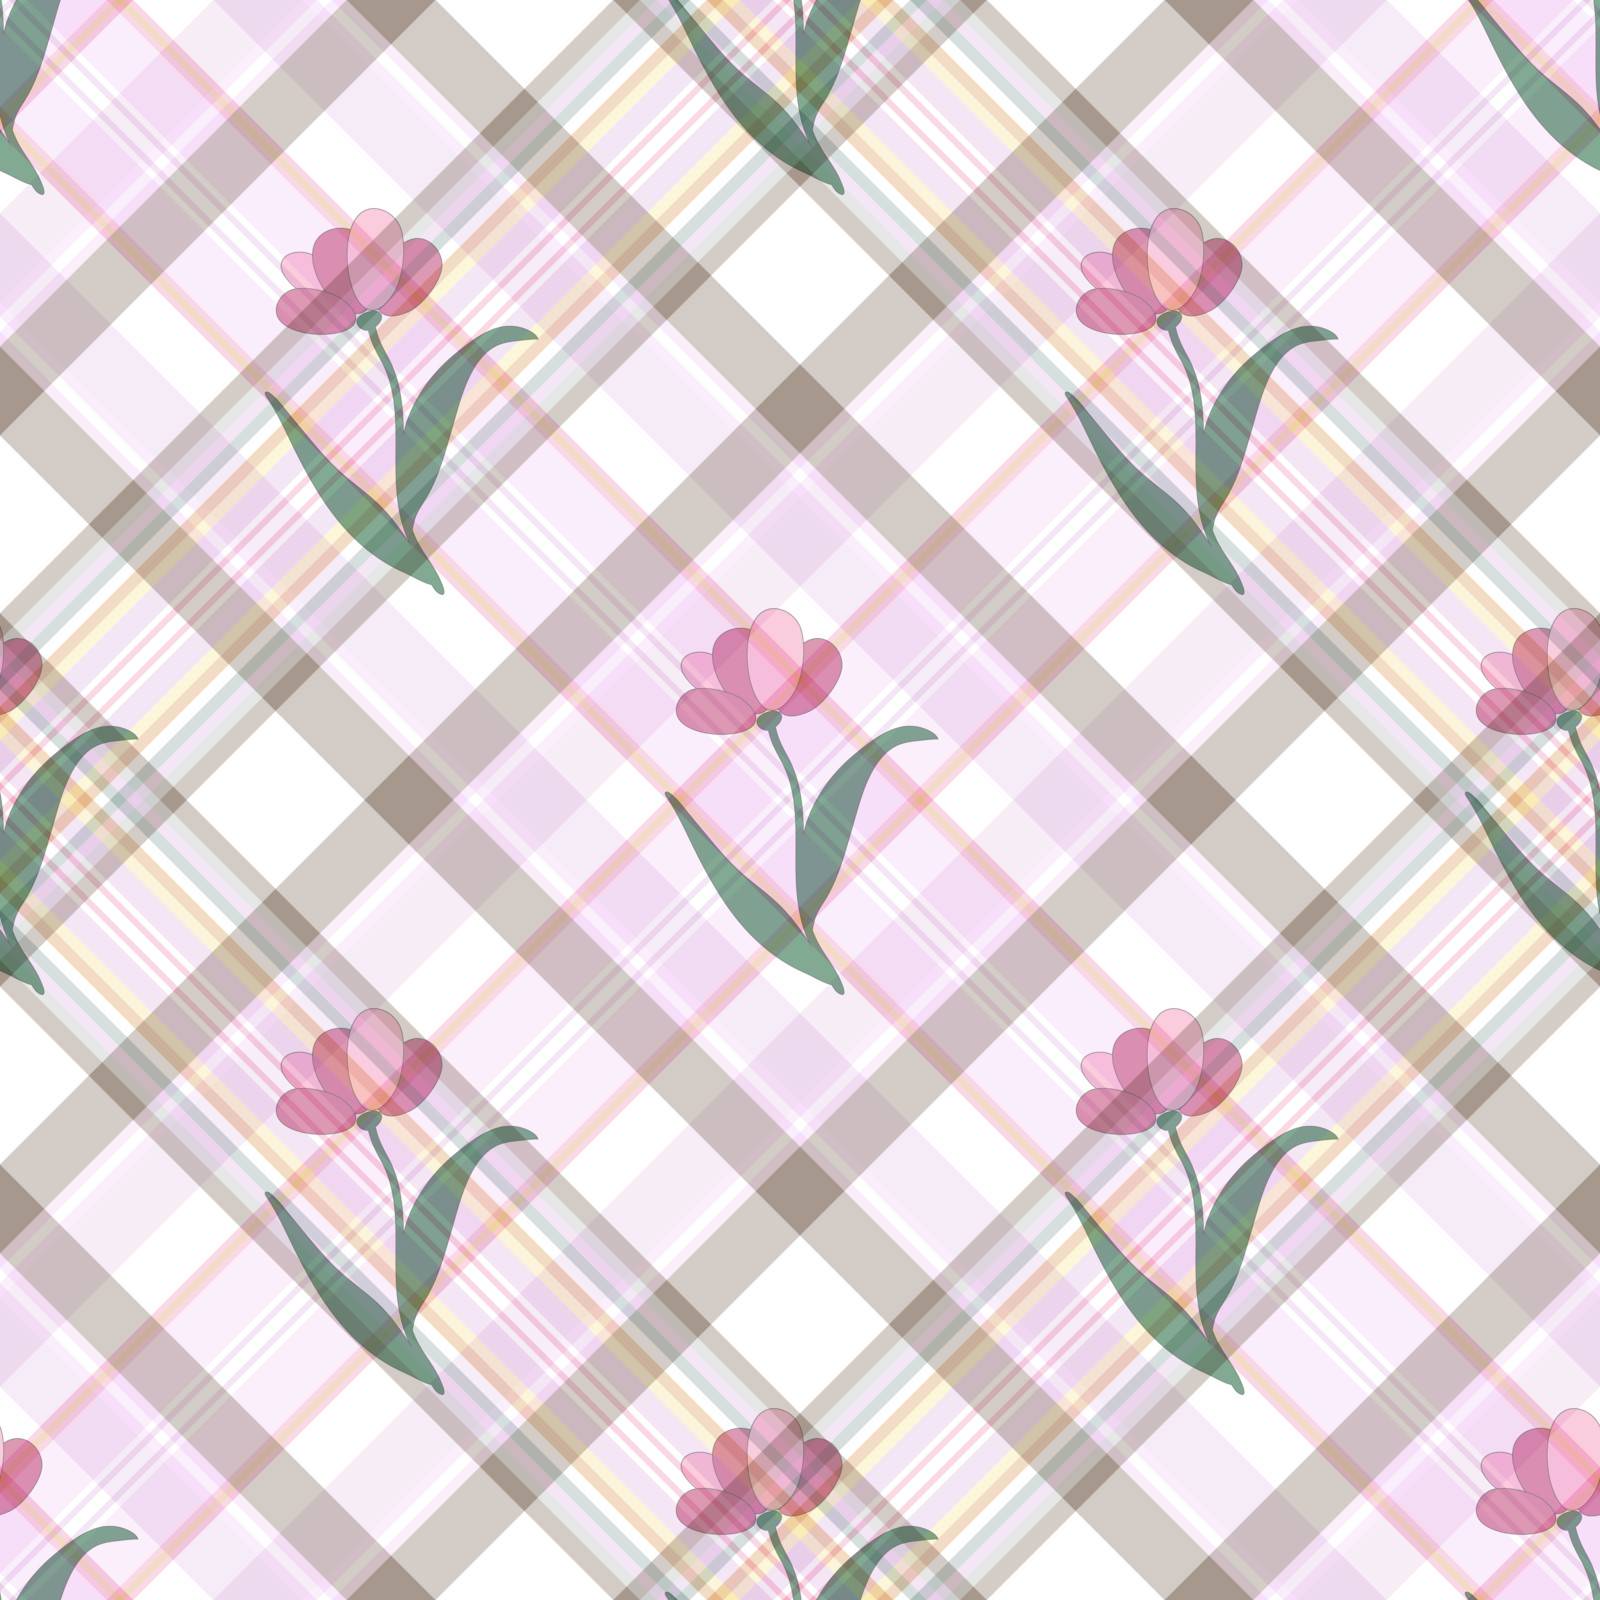 Seamless gentle floral pattern by OlgaDrozd